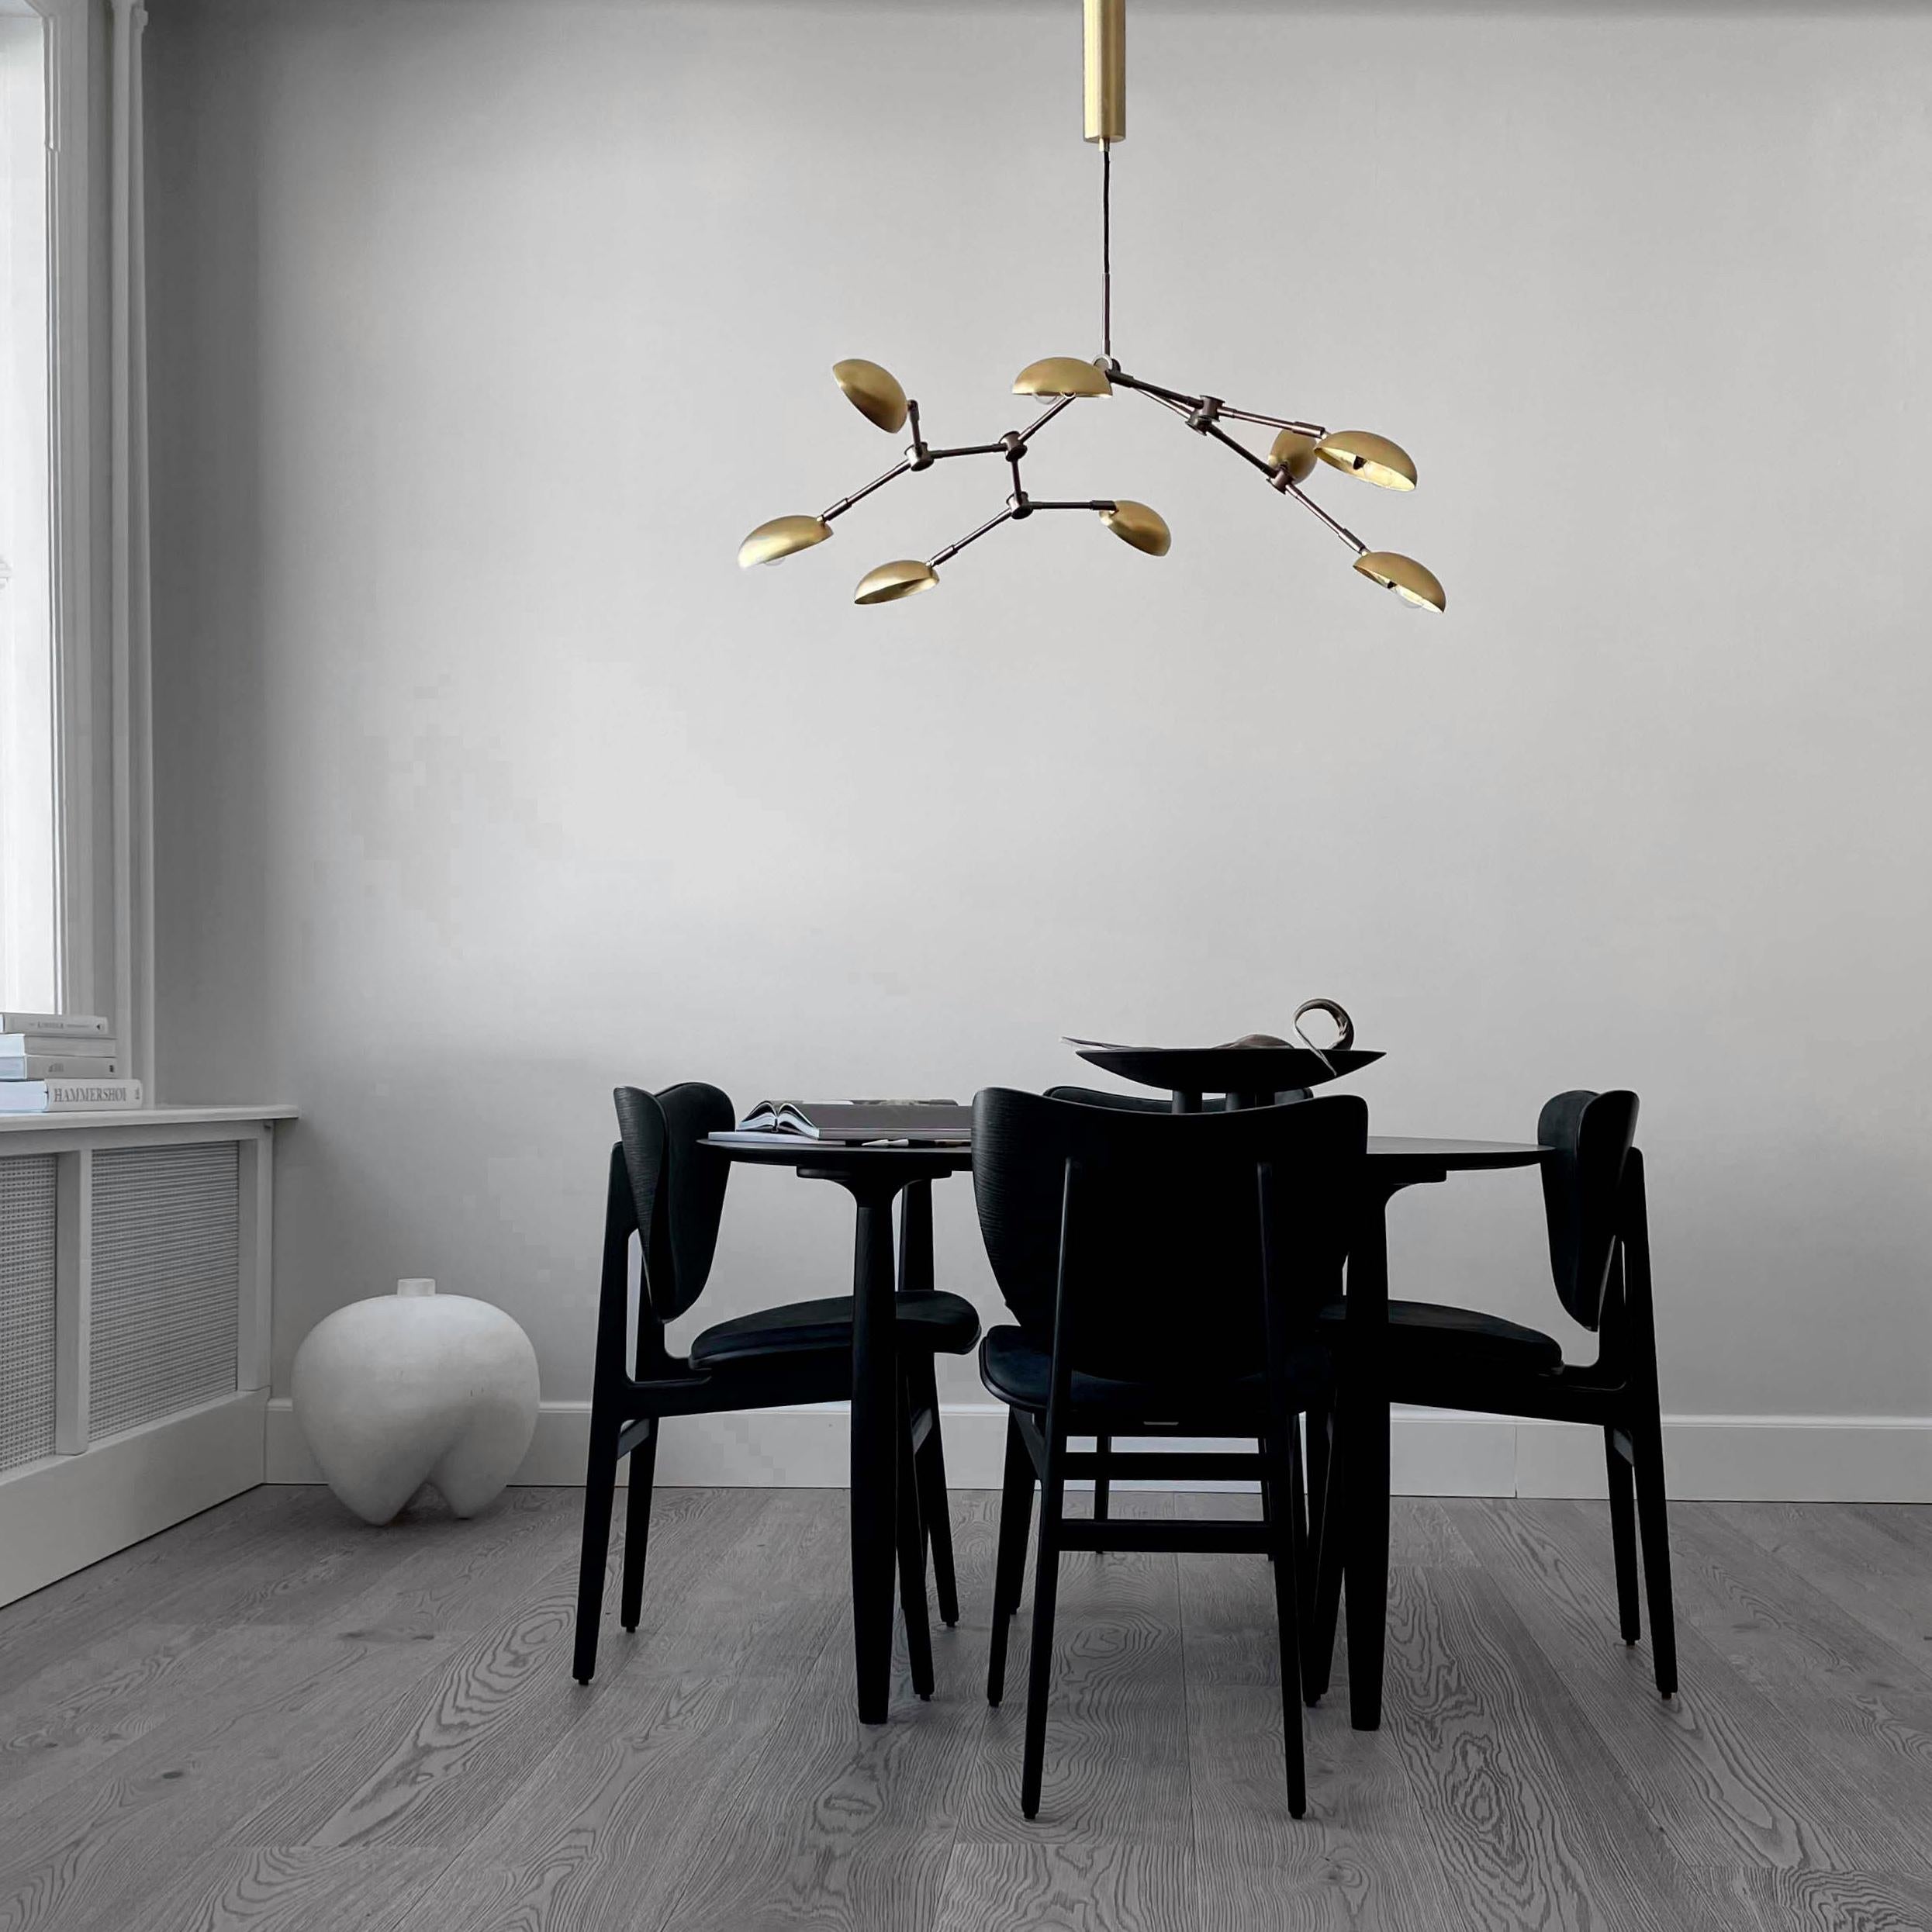 Drop Chandelier in Plated Metal by 101 Copenhagen
Designed by Kristian Sofus Hansen & Tommy Hyldahl.

Colour / Material: Burned Black
Lampshade & ceiling cup: 100% Iron, with plated Burned Black finish. Pipes & attachment parts are made of 100% Iron